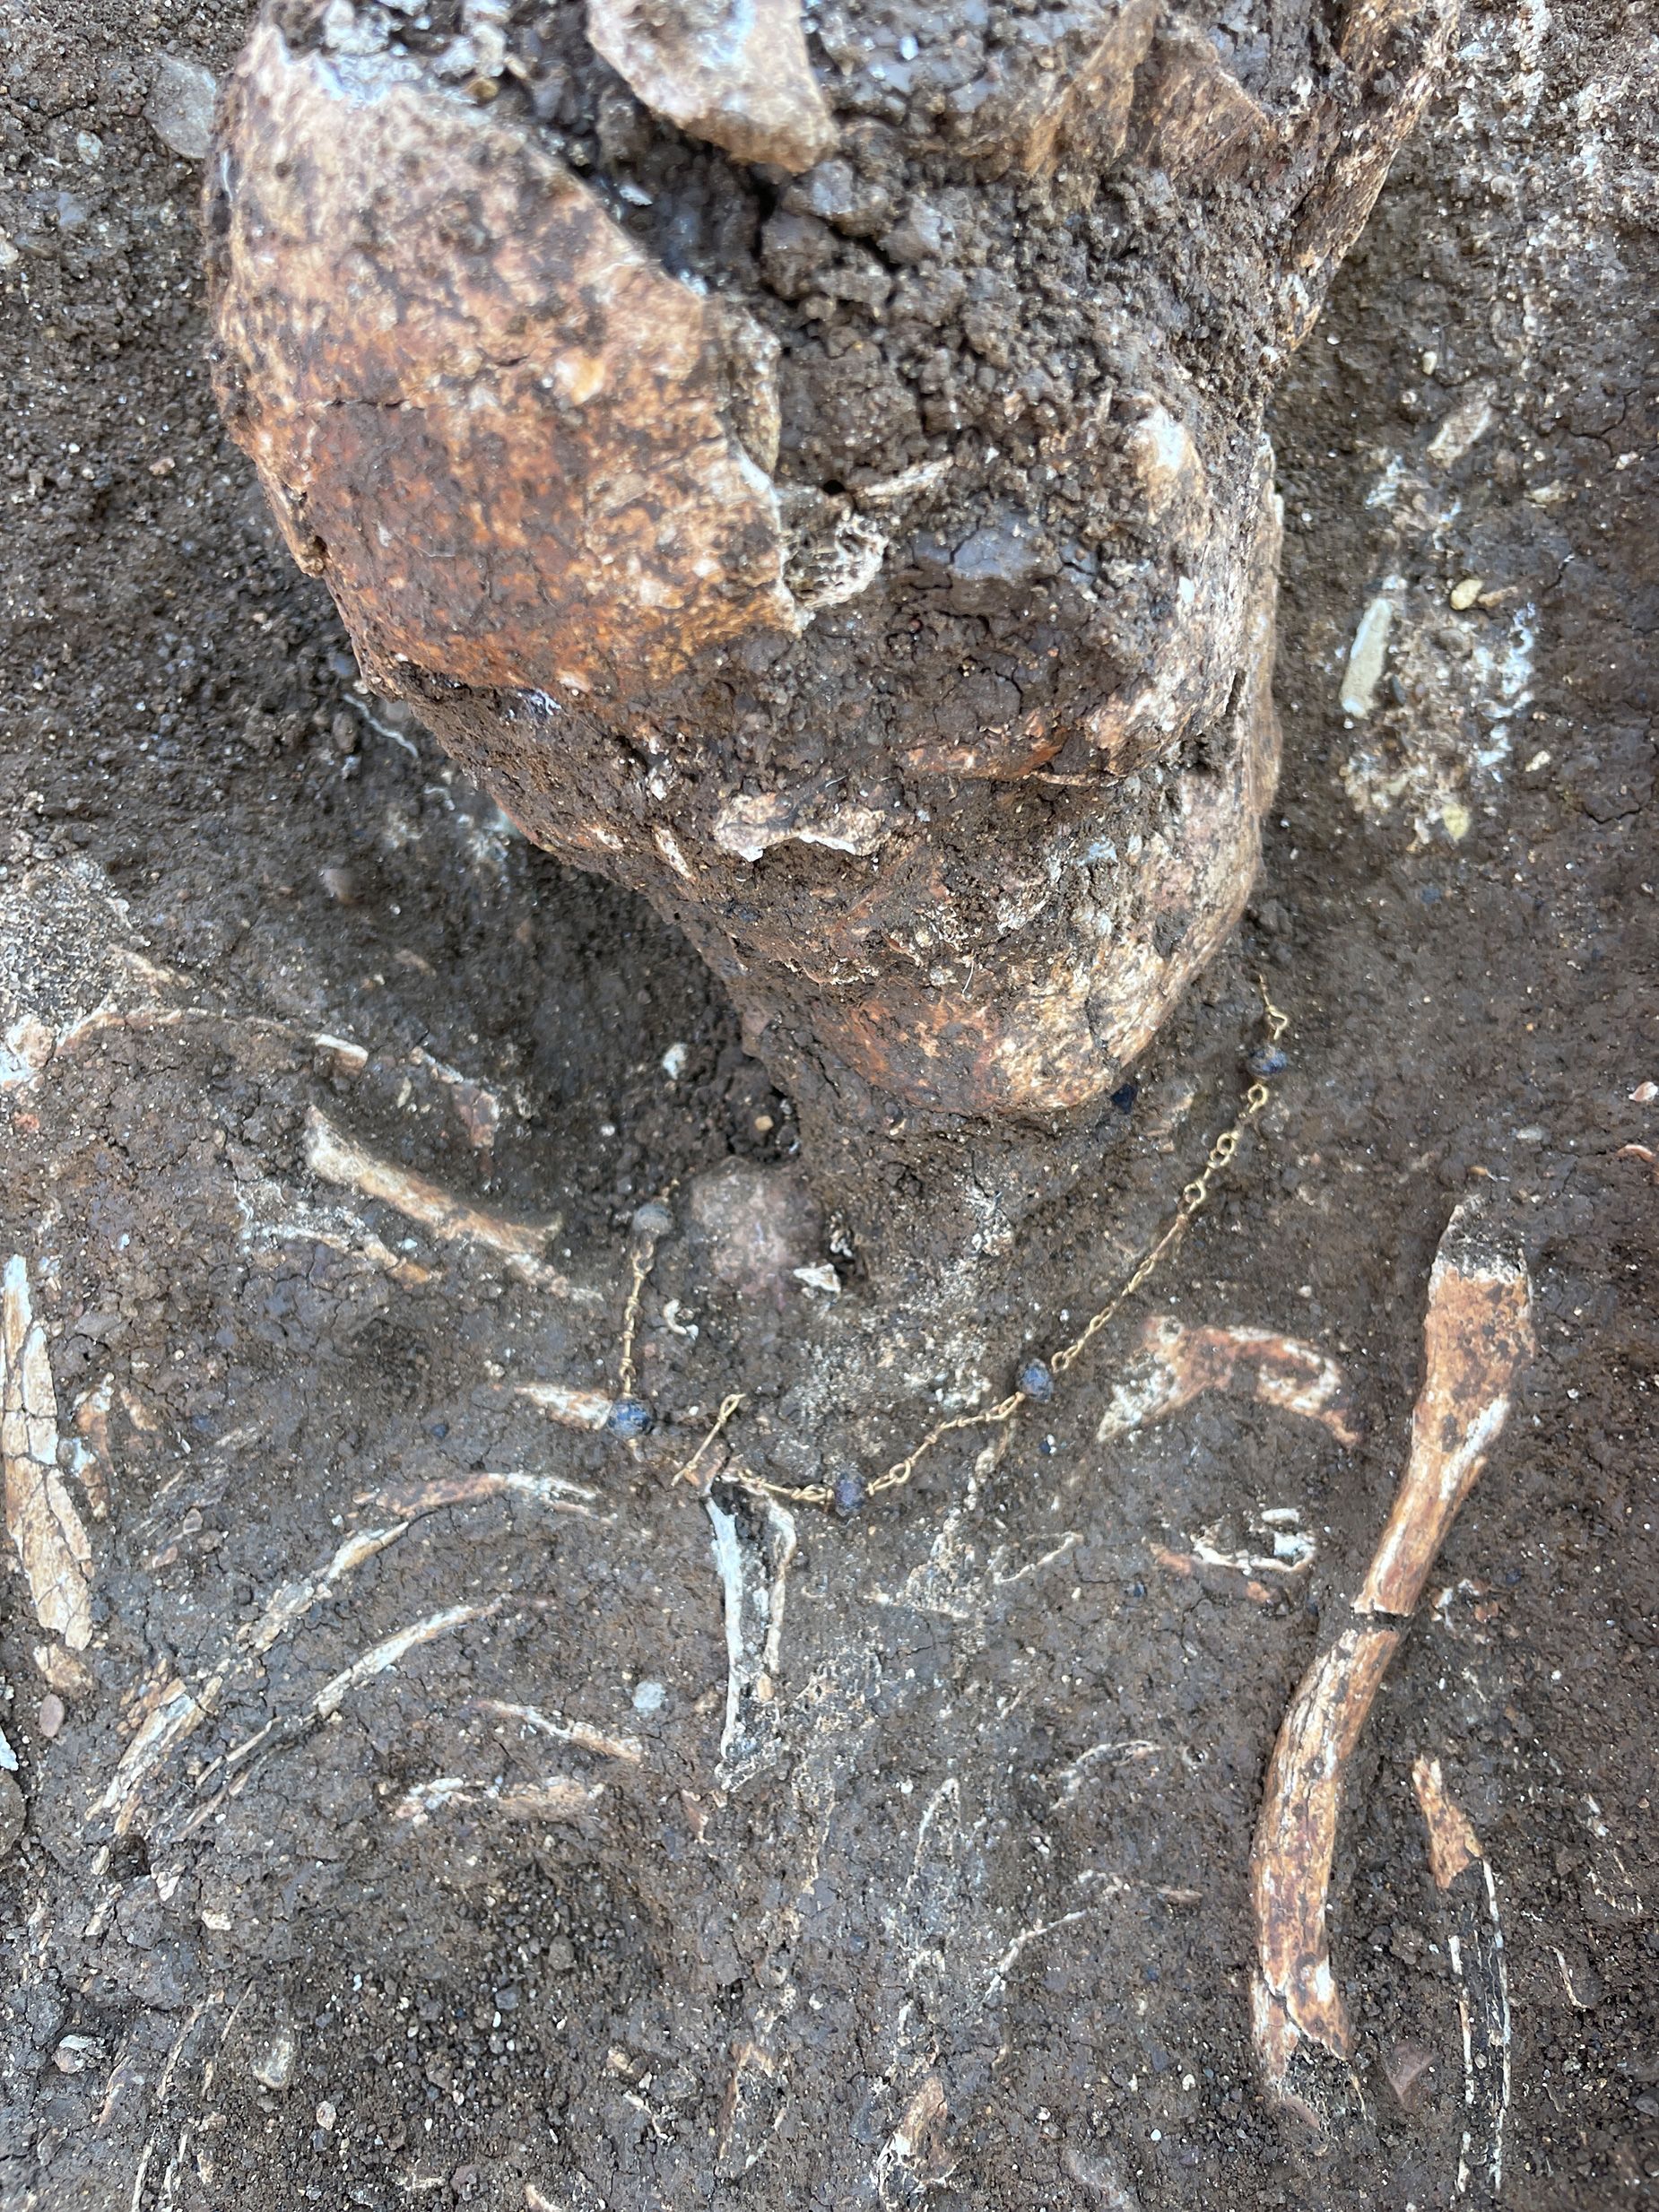 Archaeologists say the discovery of 67 skeletons dressed in their finery across in 57 tombs is 